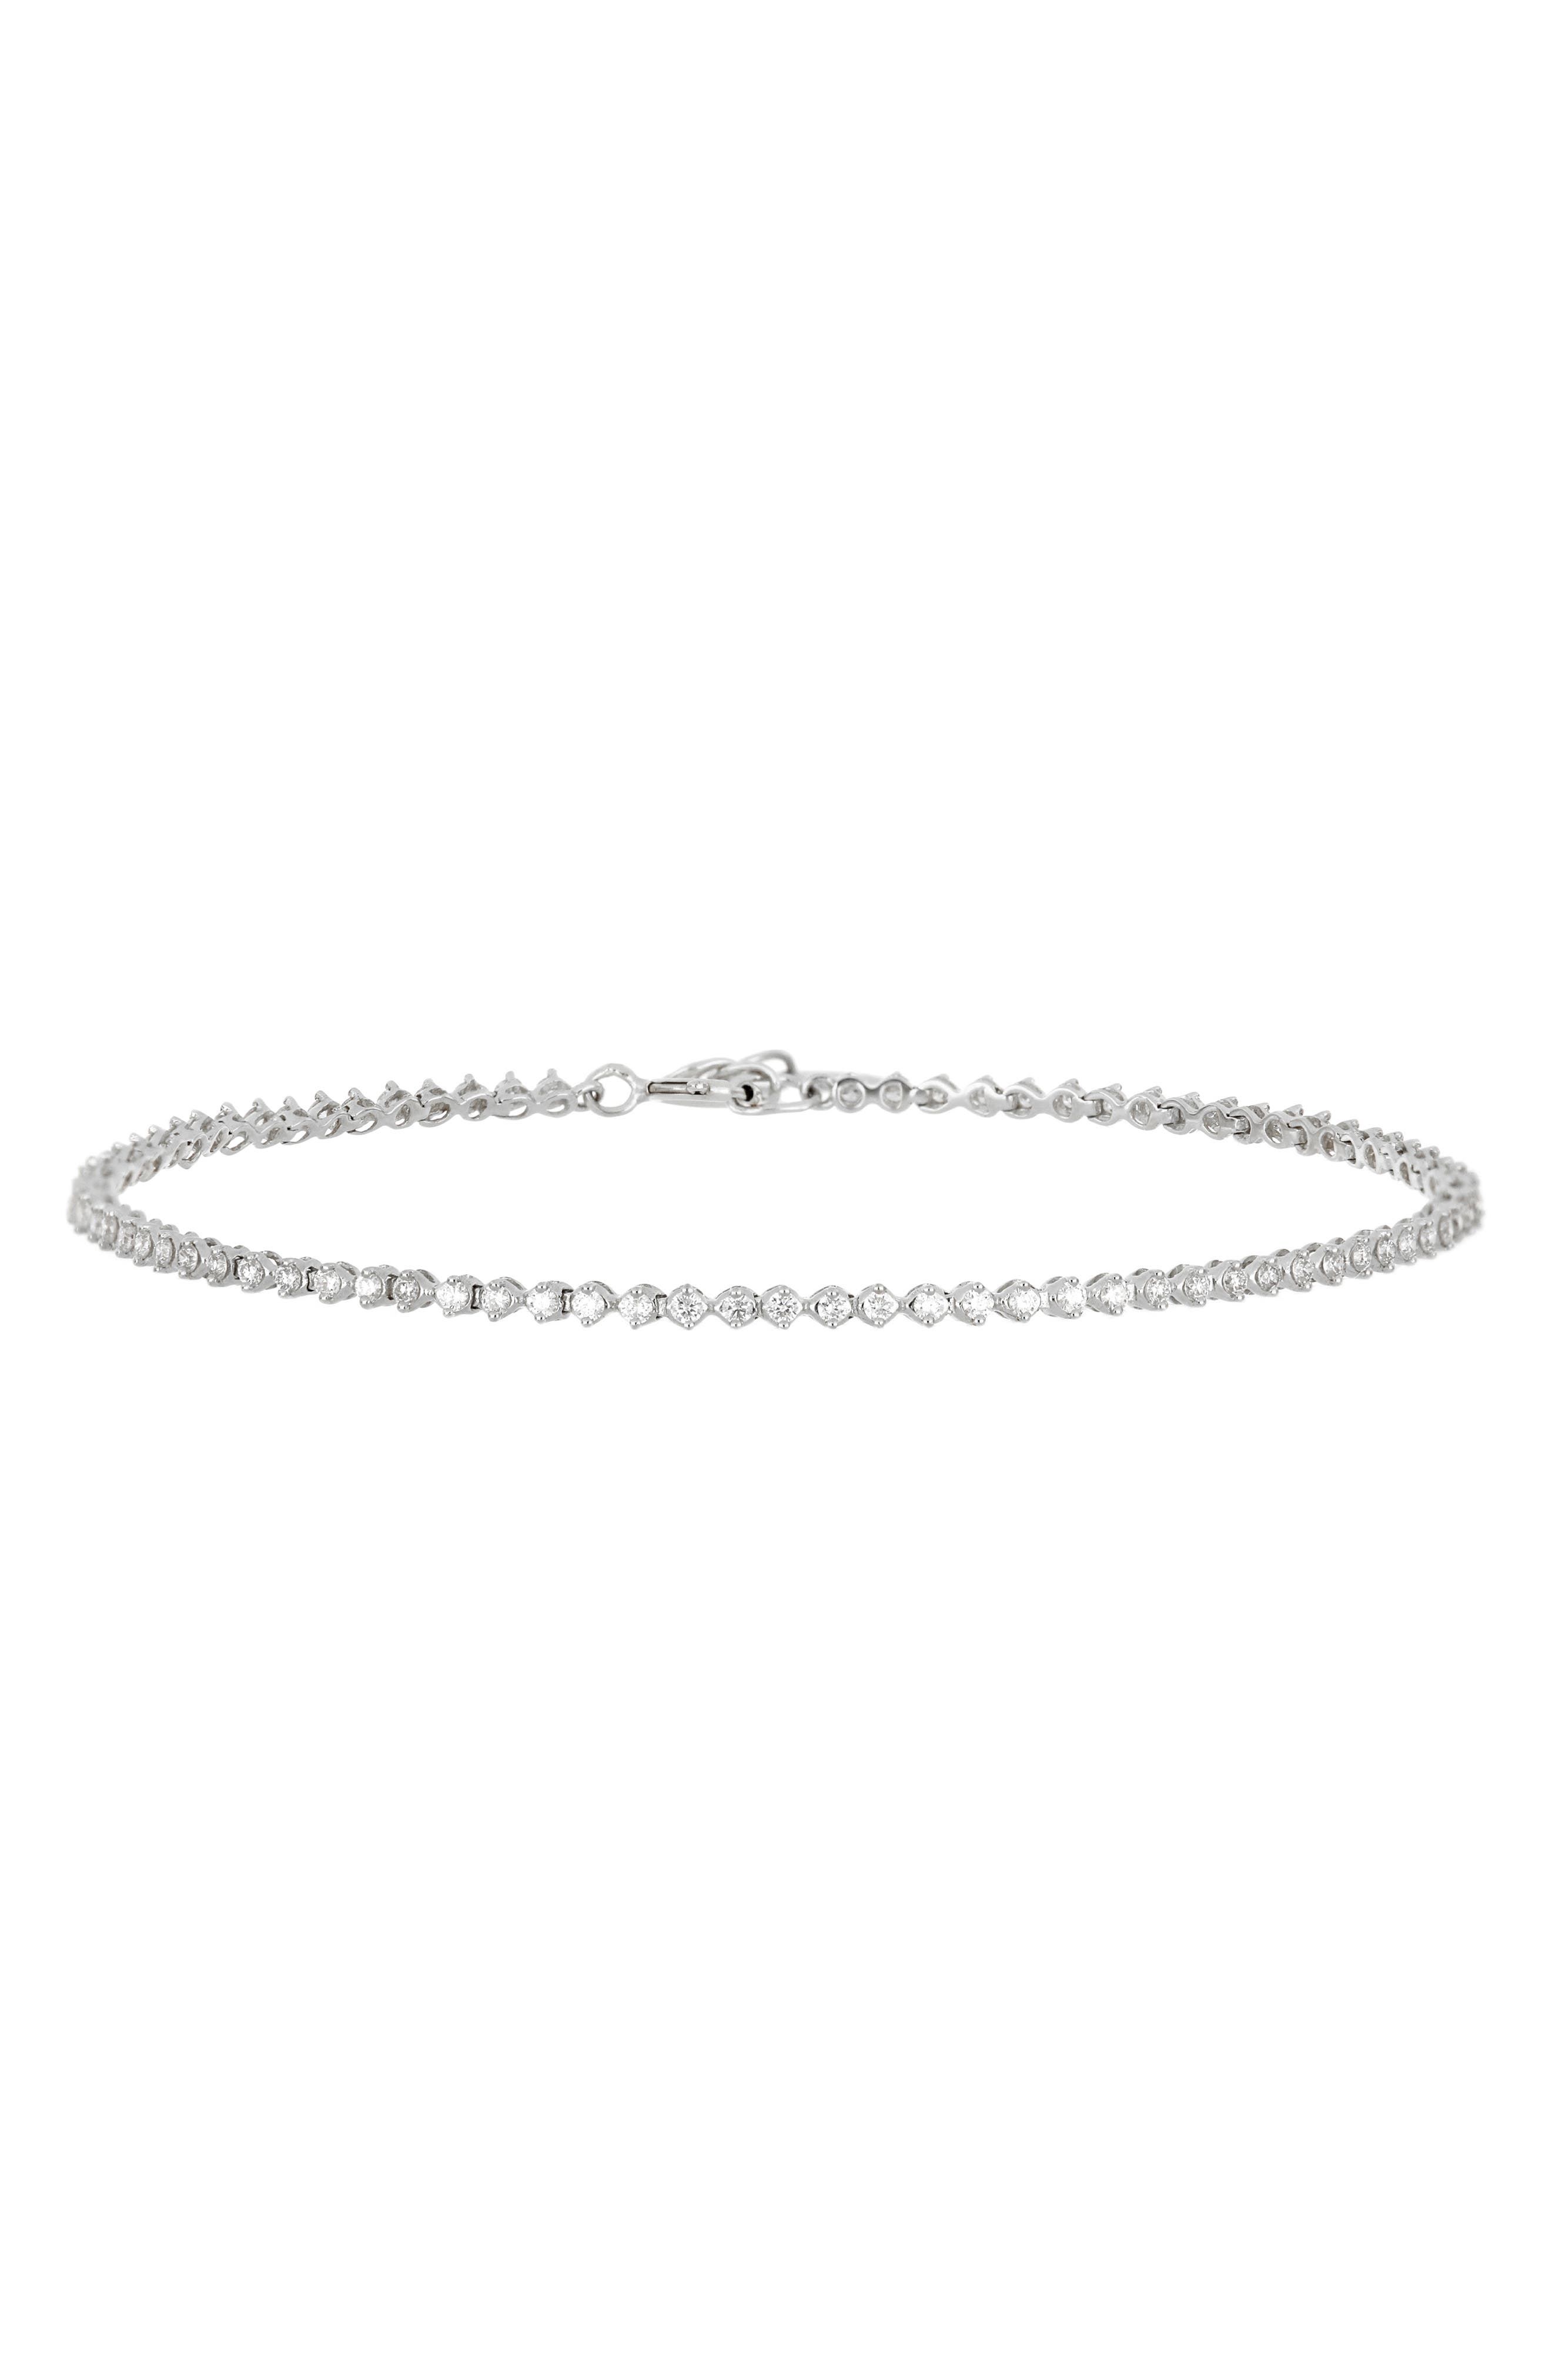 Chris Everts New Tennis Bracelet Collection Tells the Real Story Behind  the Diamond Essential  Only Natural Diamonds